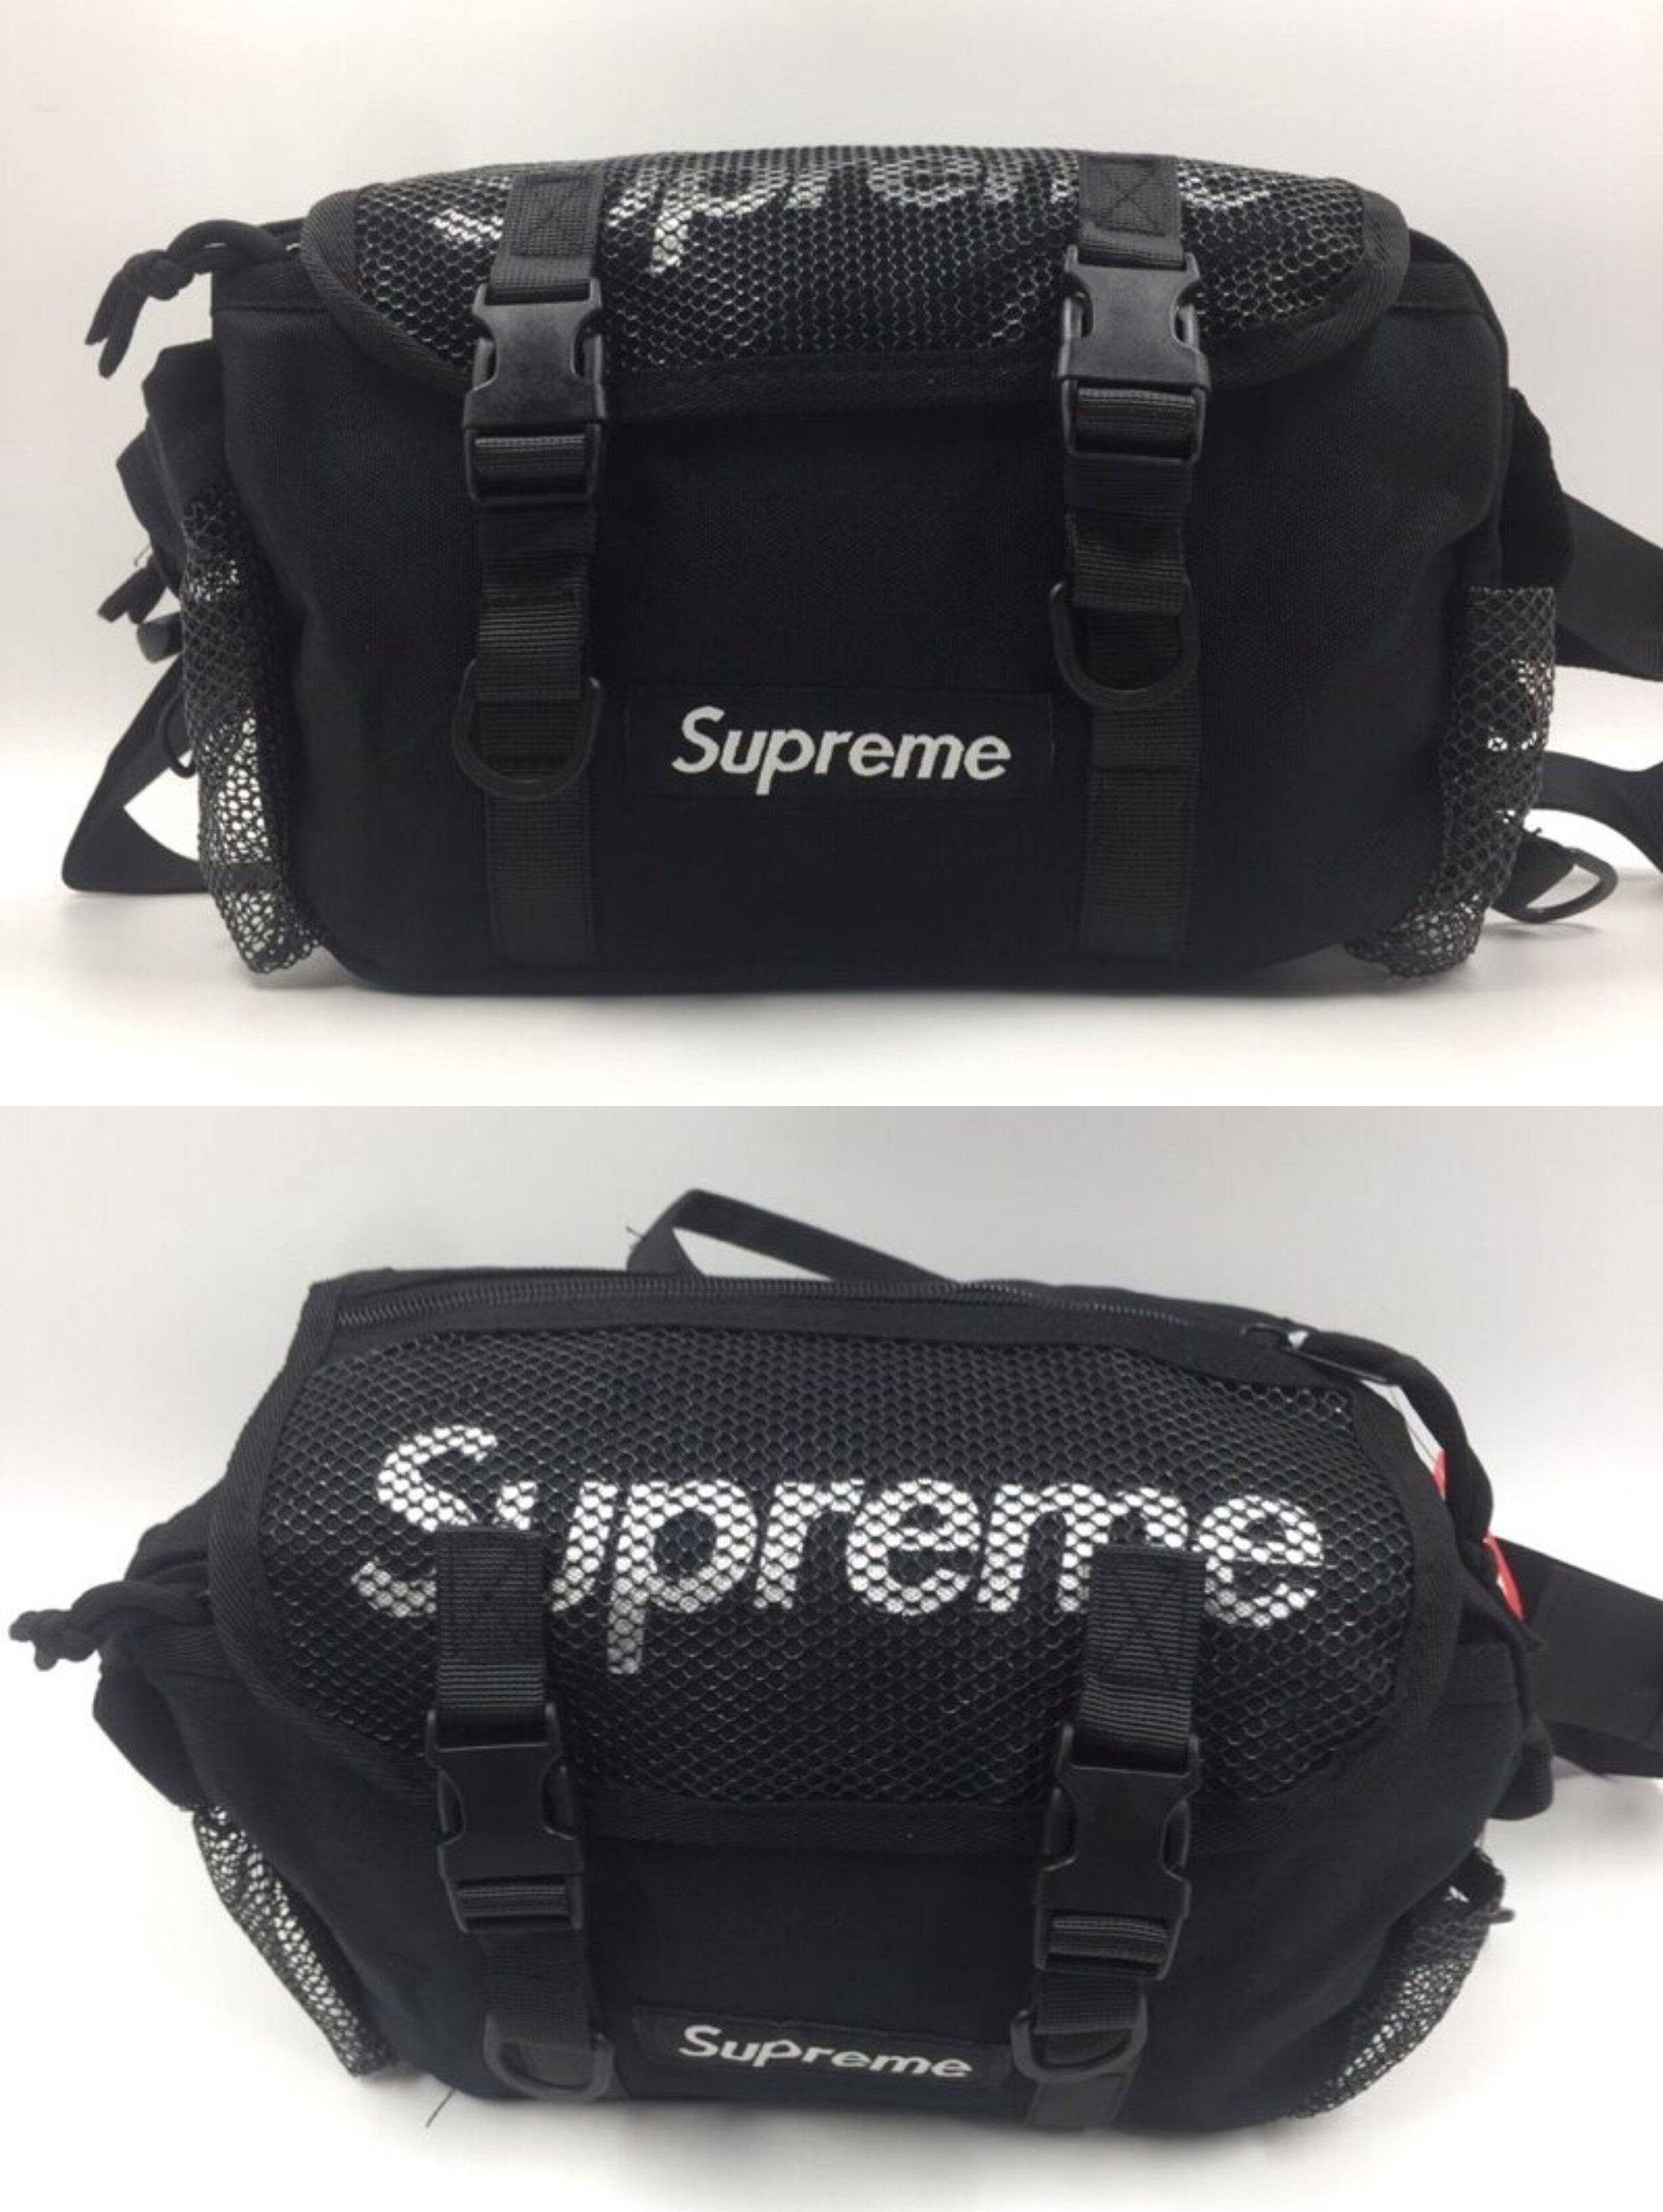 pouch bag supreme - Buy pouch bag supreme at Best Price in 